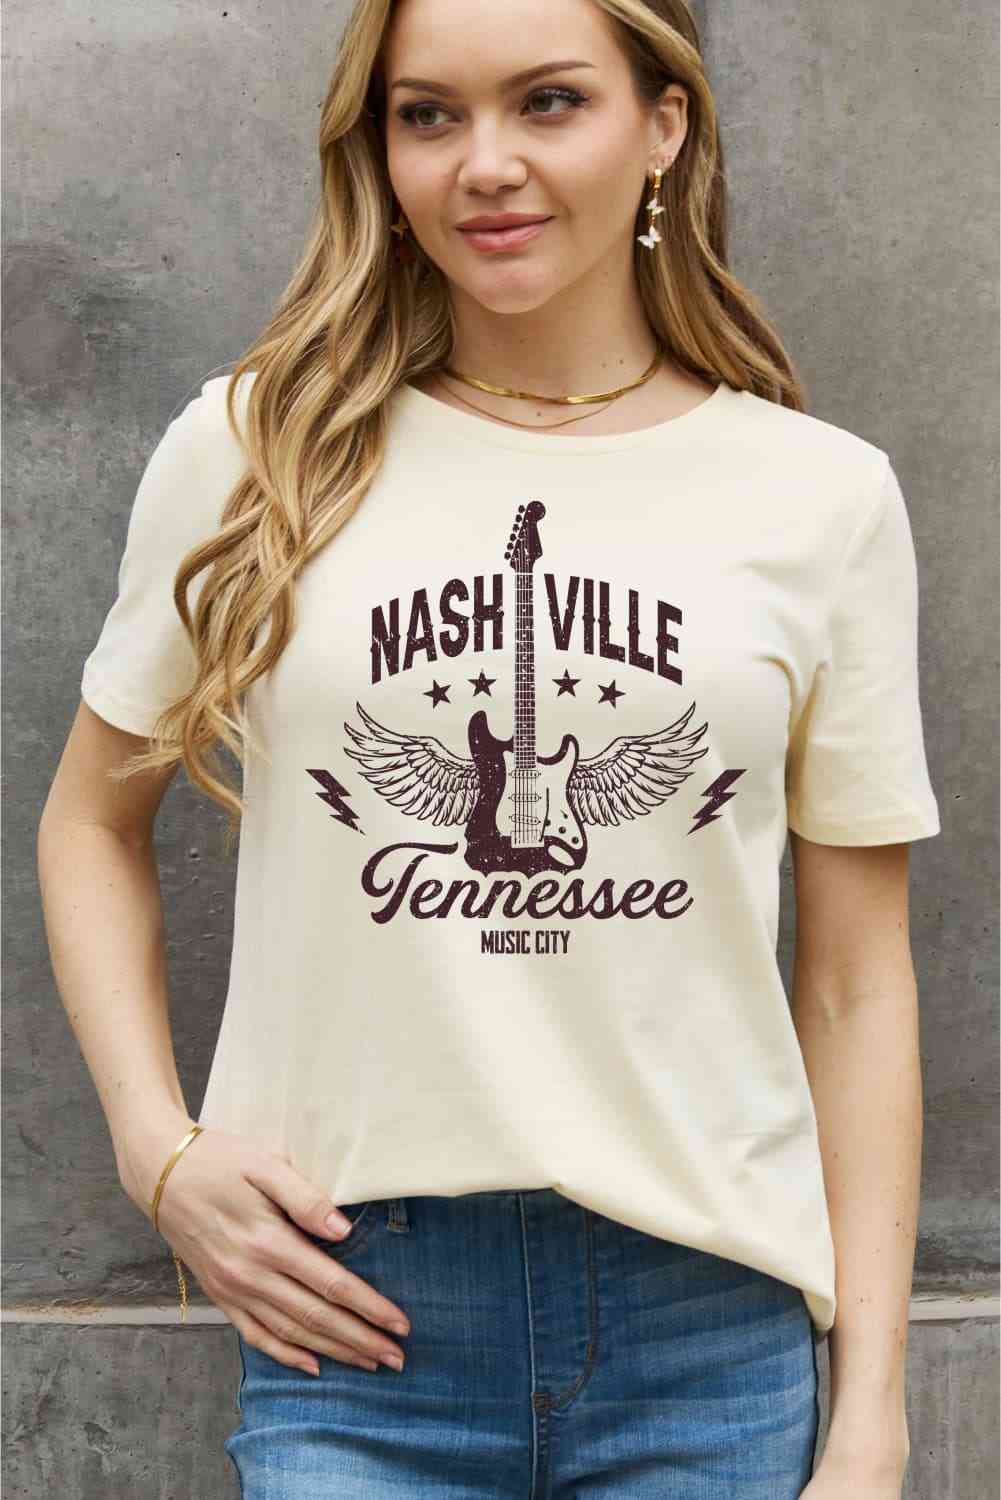 NASHVILLE TENNESSEE MUSIC CITY Graphic Cotton Tee - T-Shirts - Shirts & Tops - 3 - 2024